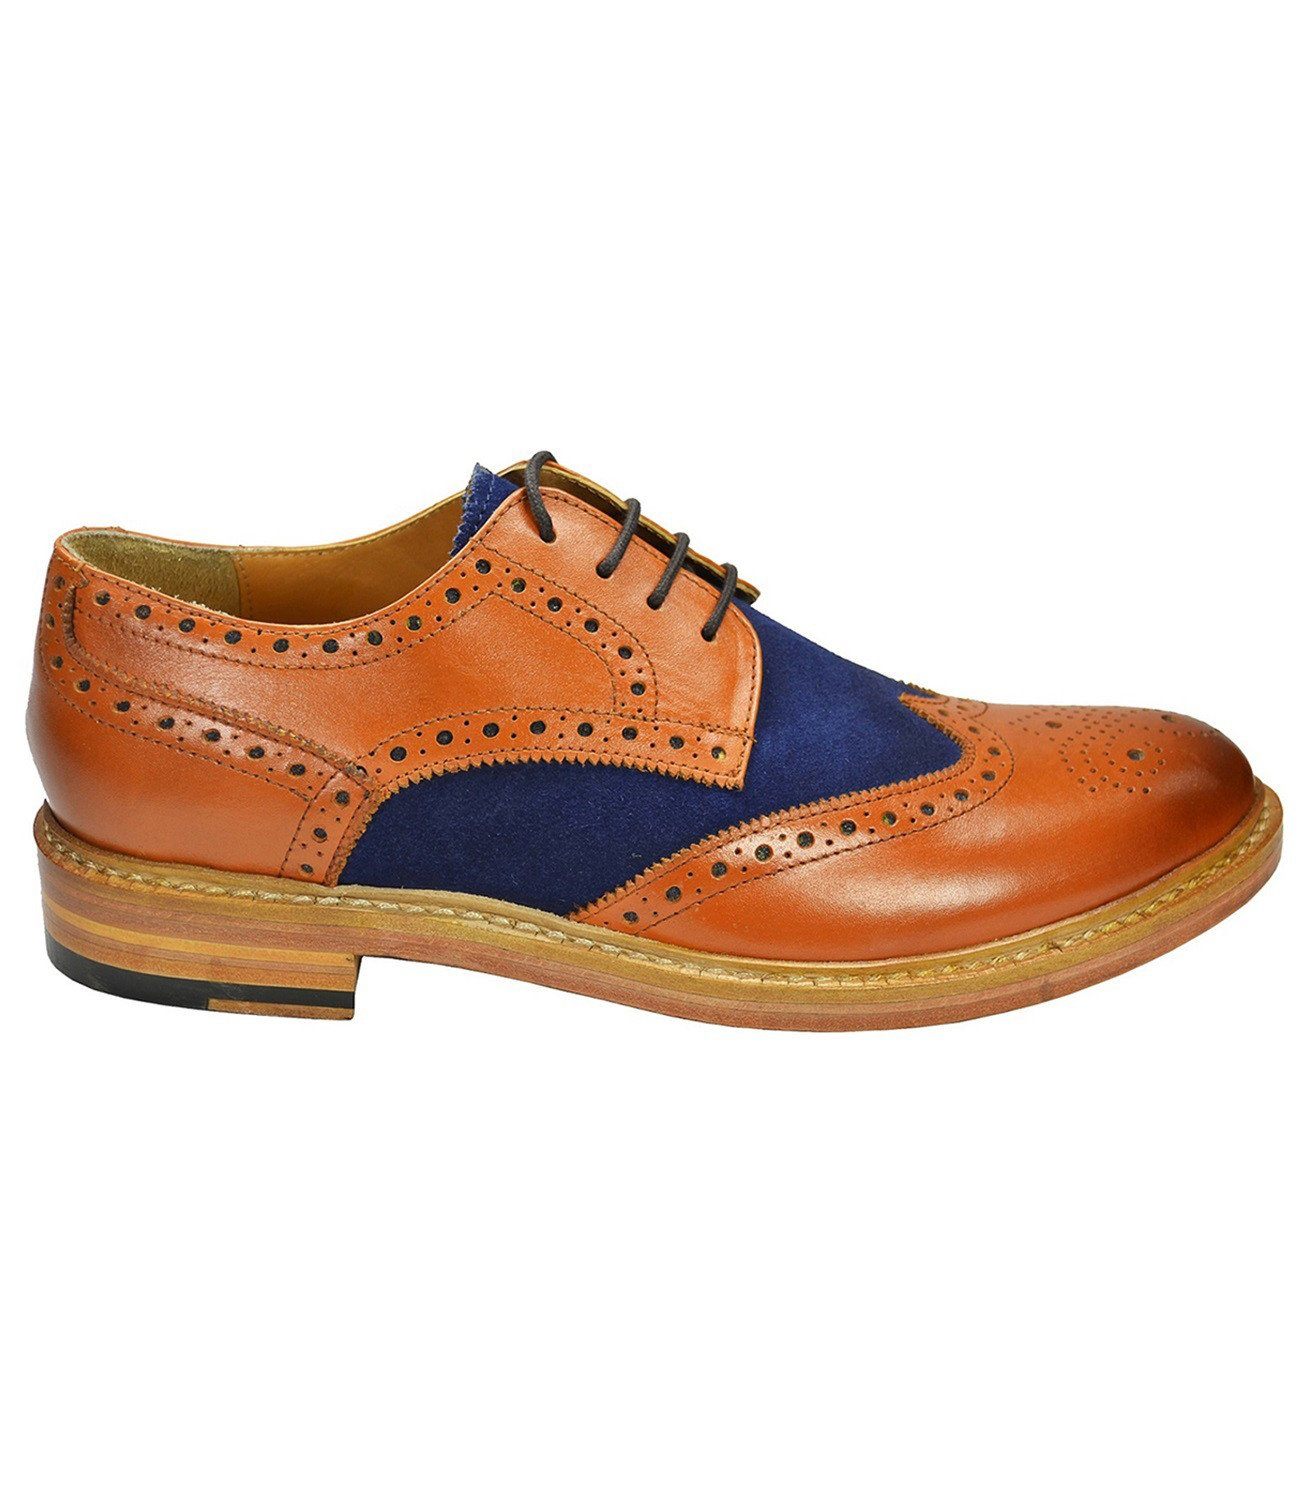 BRADFORD Brown and Navy Full Brogue Oxford Leather Shoes